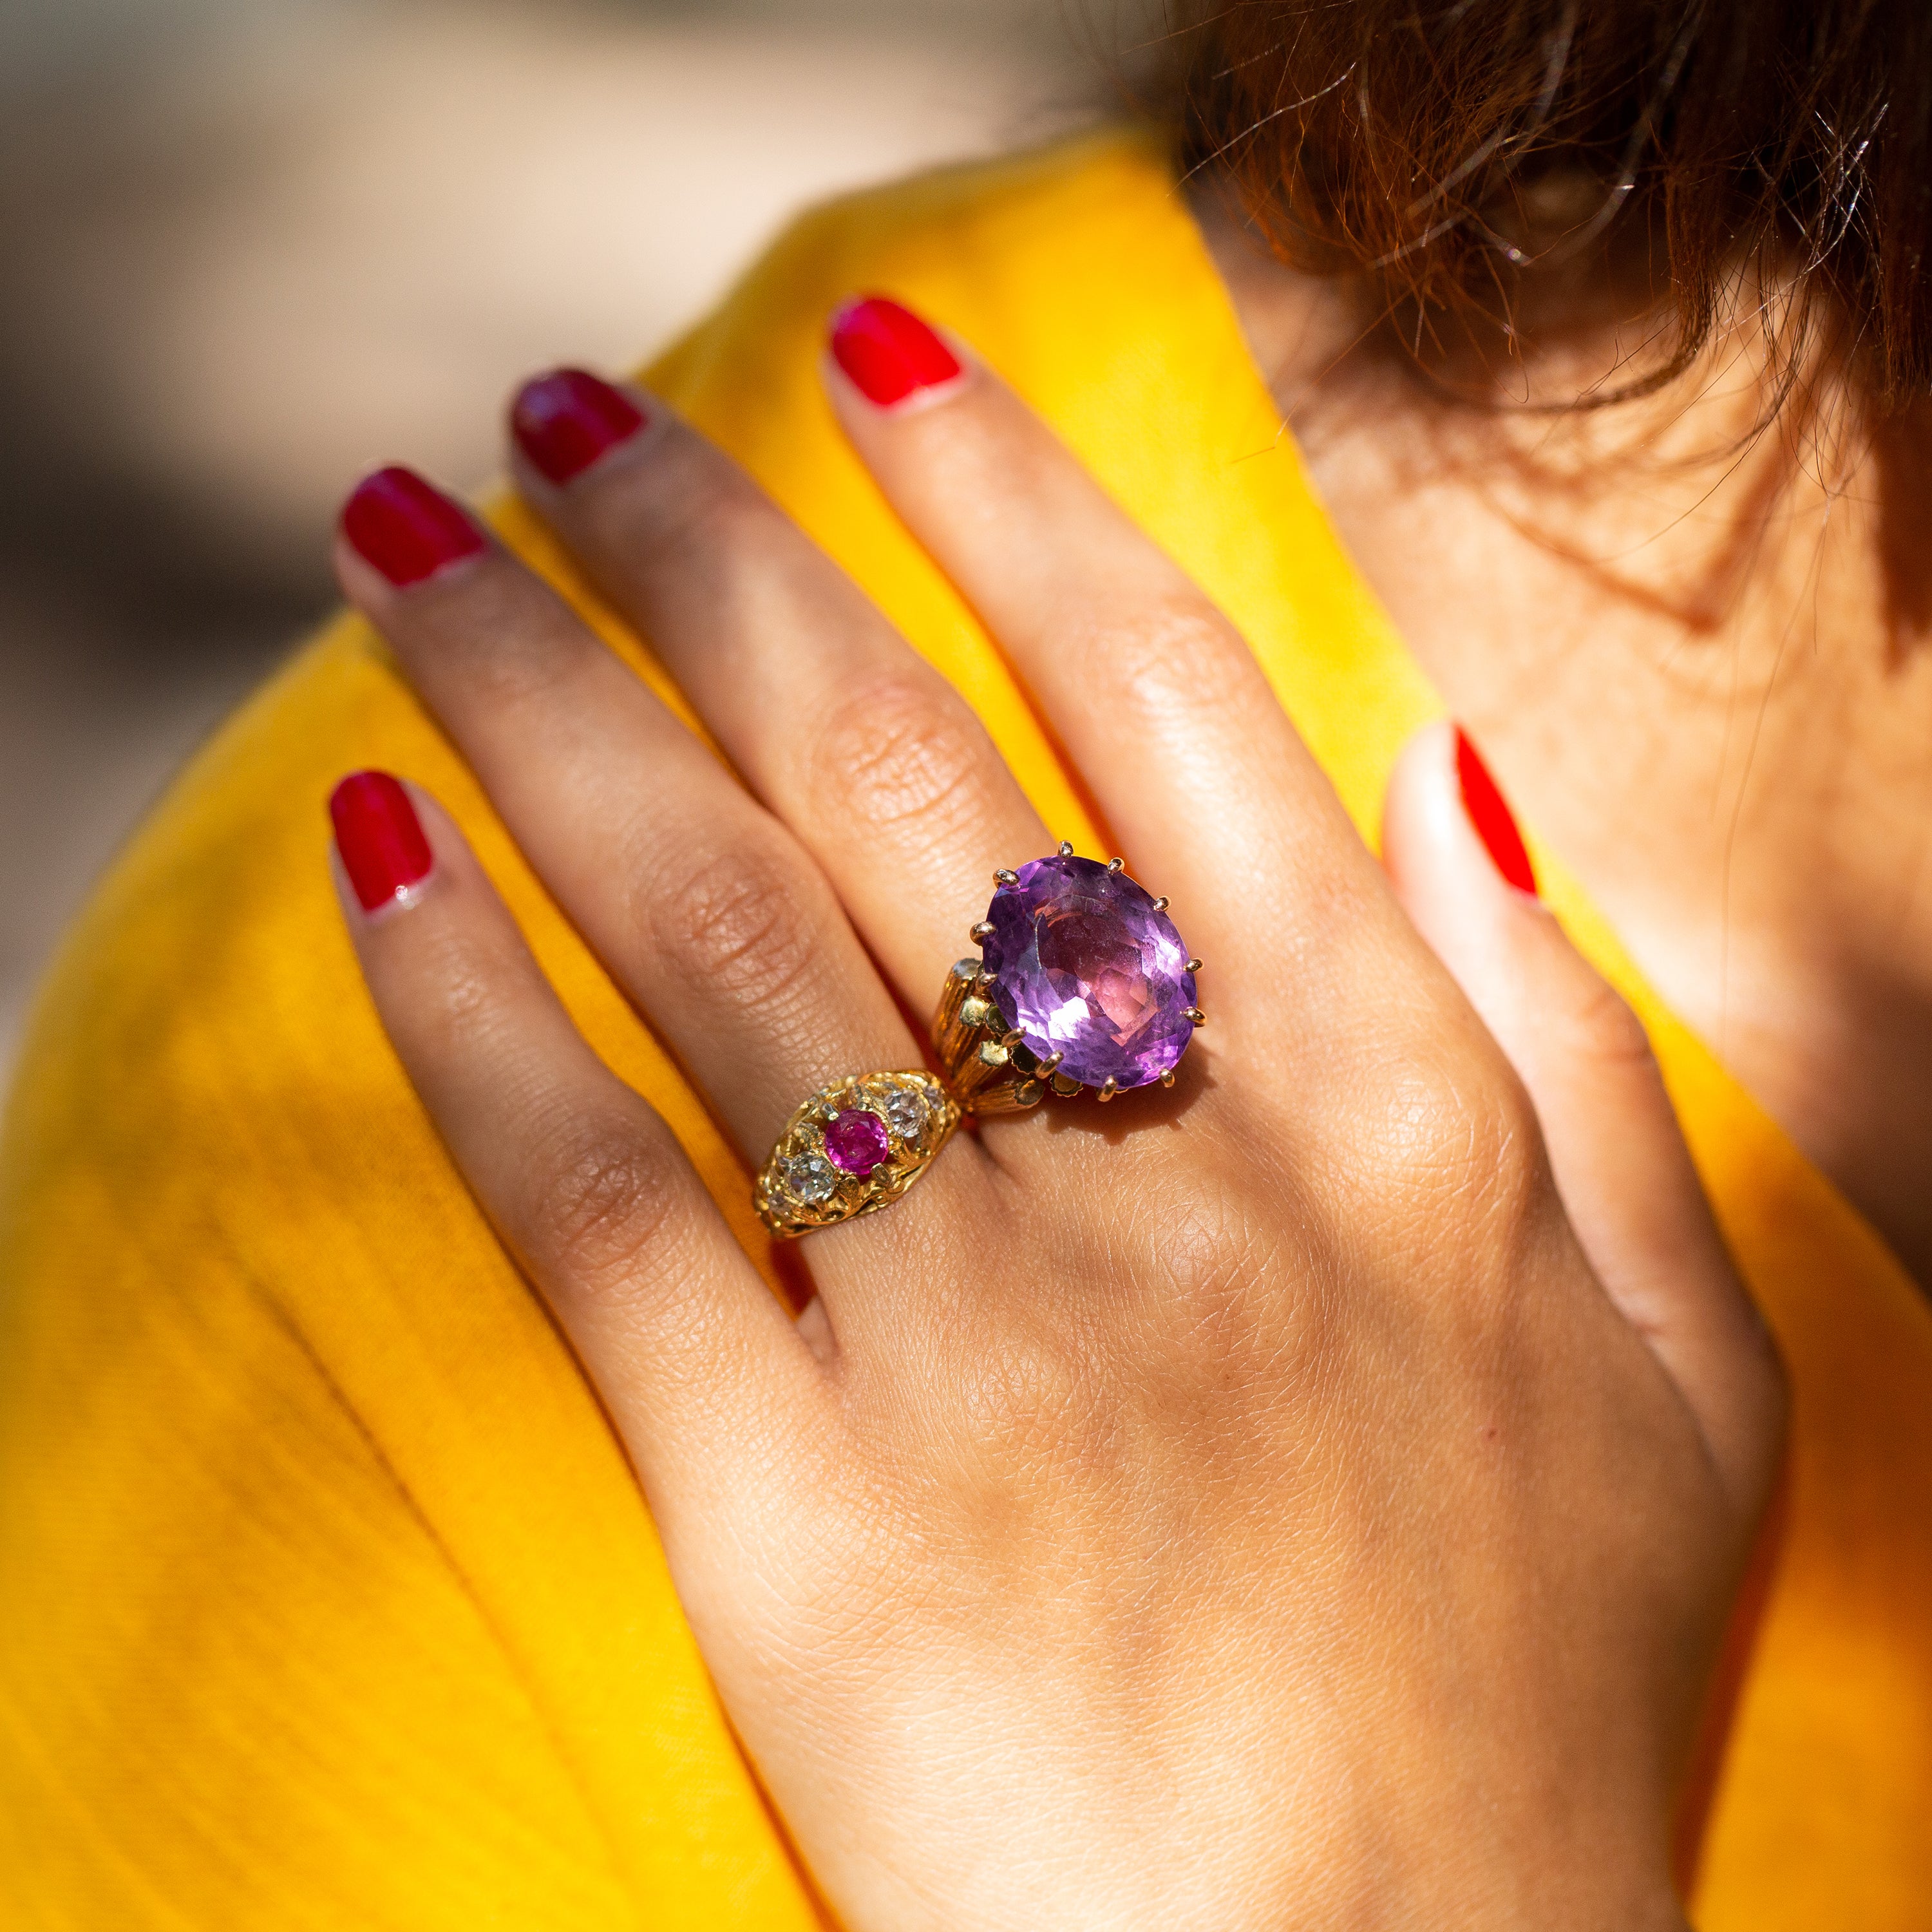 Large Oval Amethyst and 14k Gold Cocktail Ring